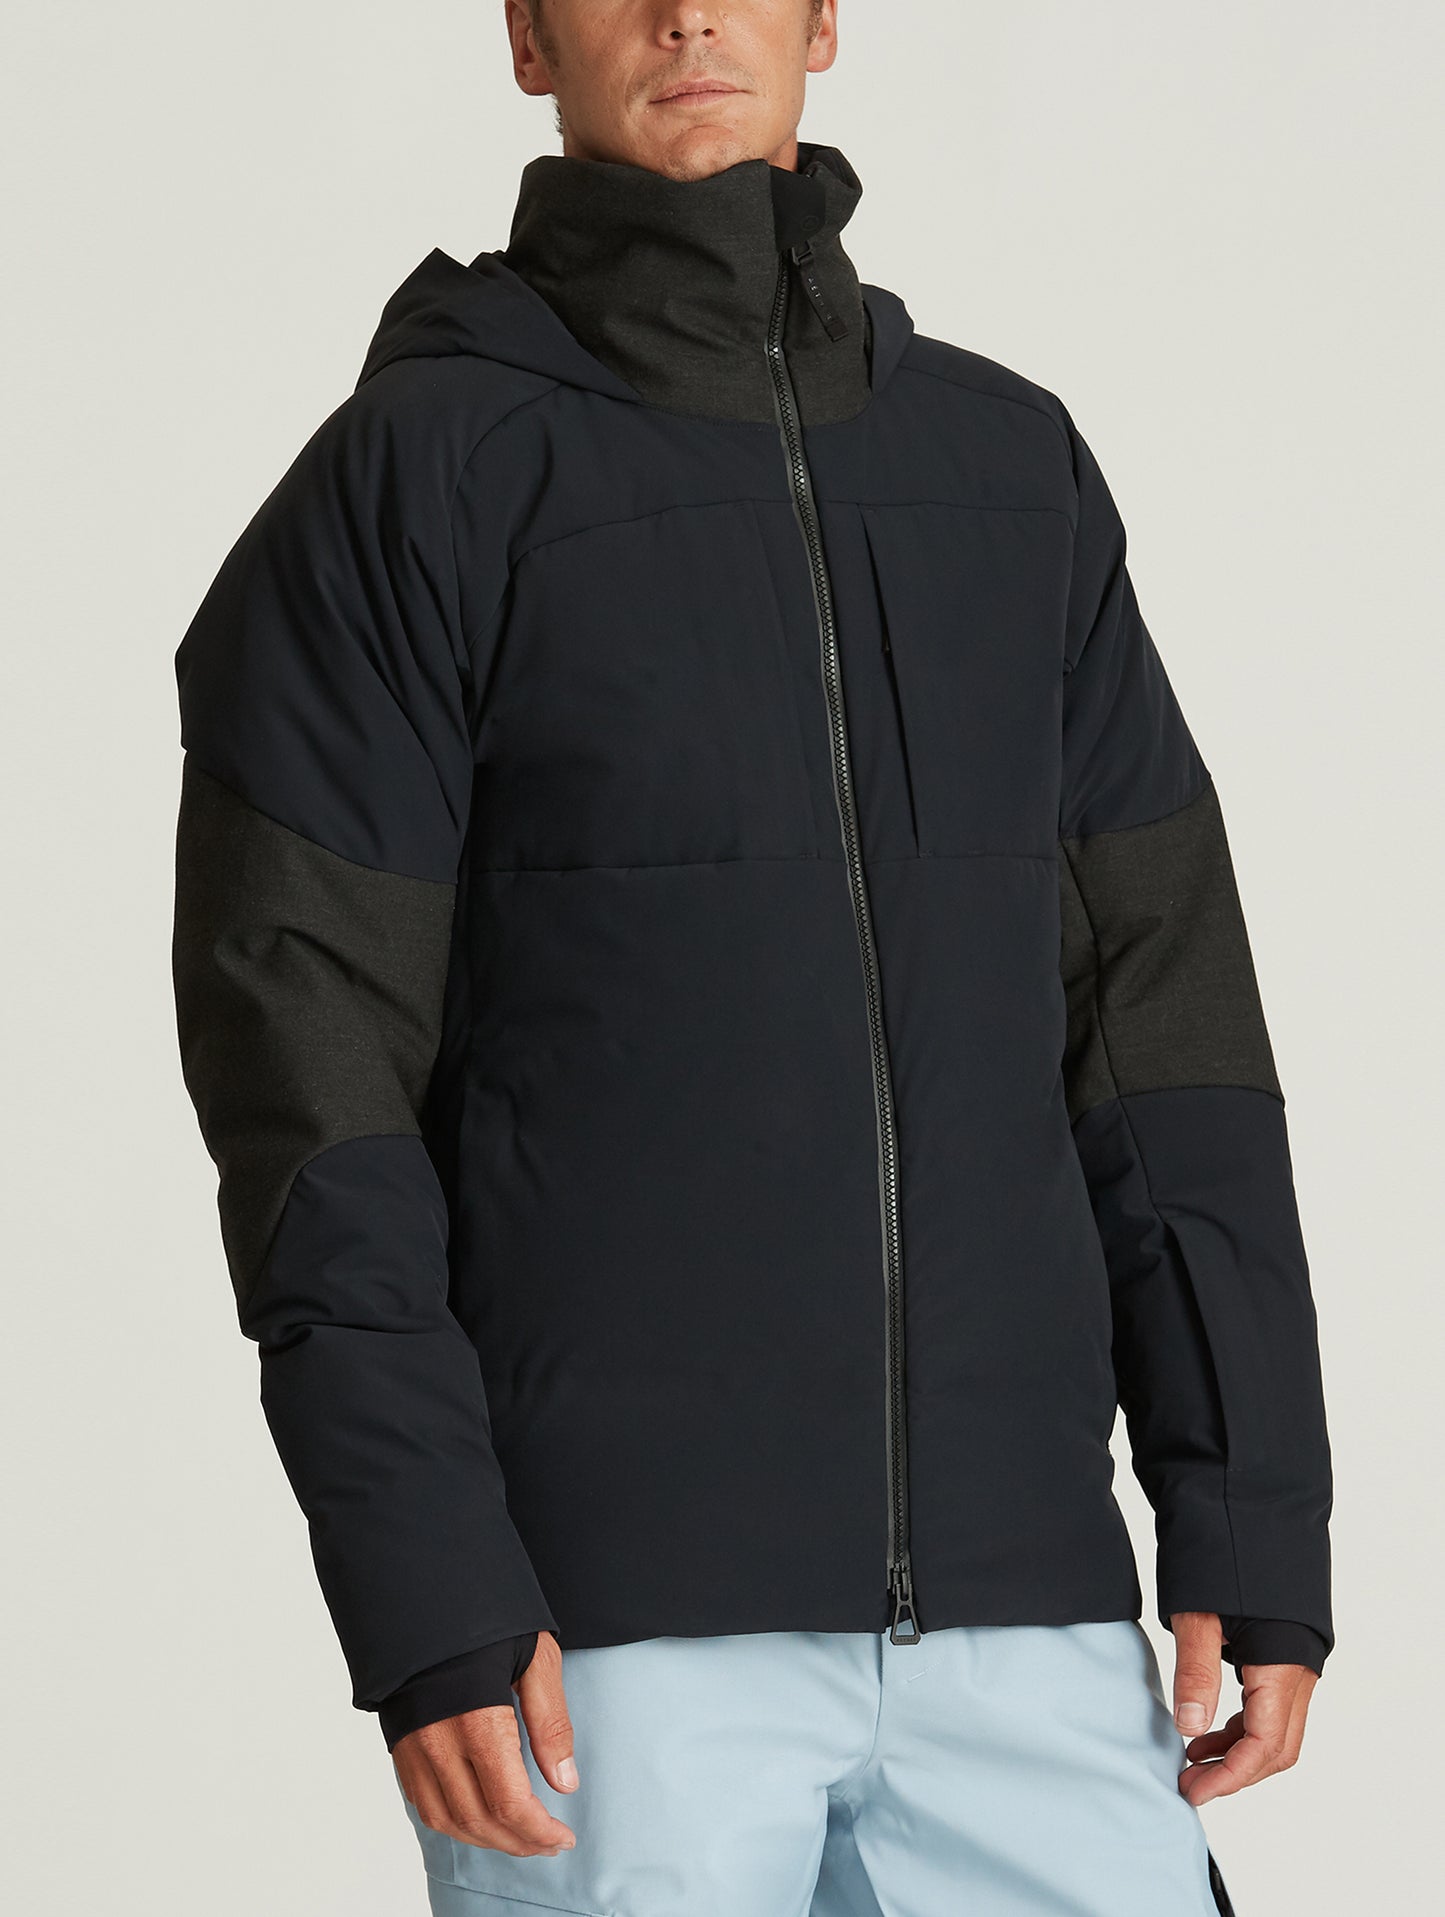 man wearing black ski jacket from Aether Apparel